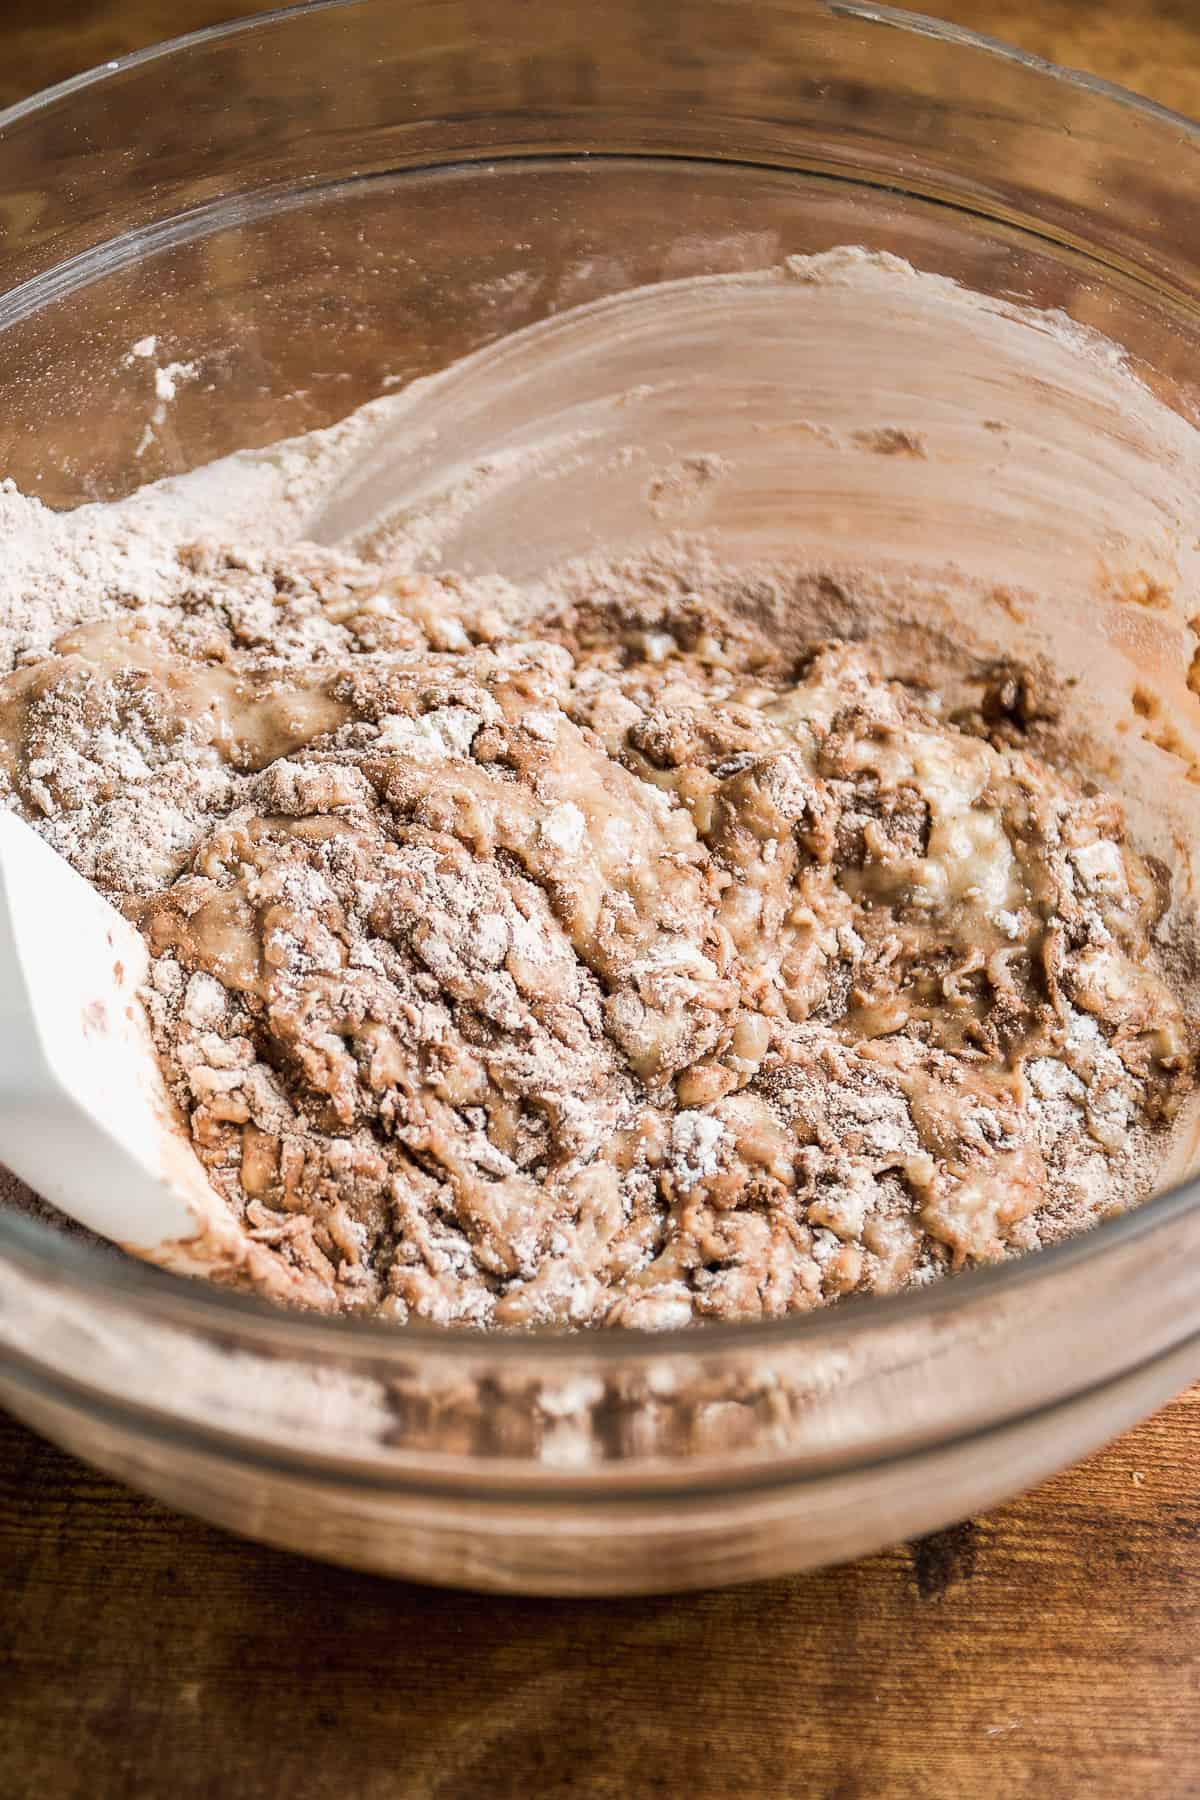 Coffee doughnut batter being mixed in a bowl.